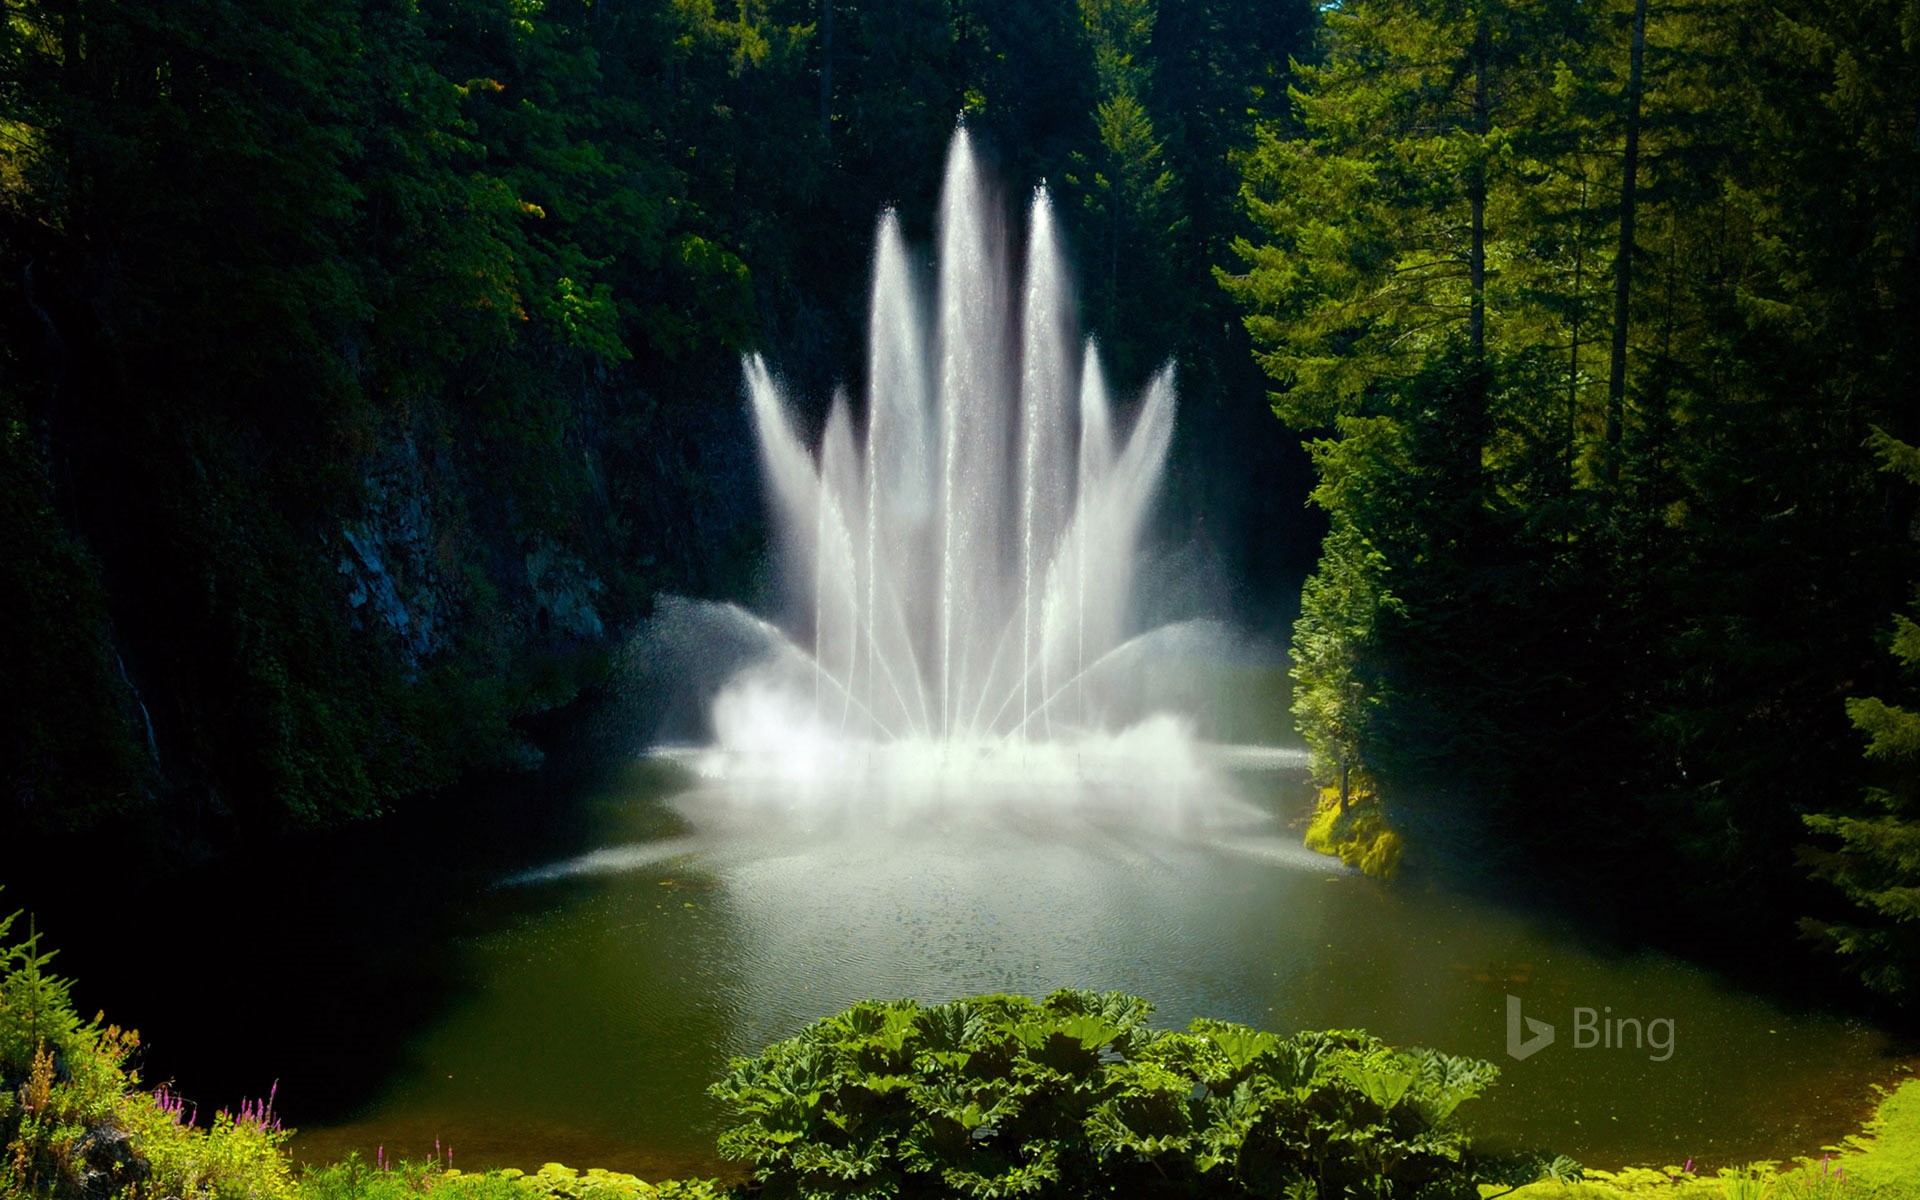 Ross Fountain at Butchart Gardens in Victoria, British Columbia, Canada